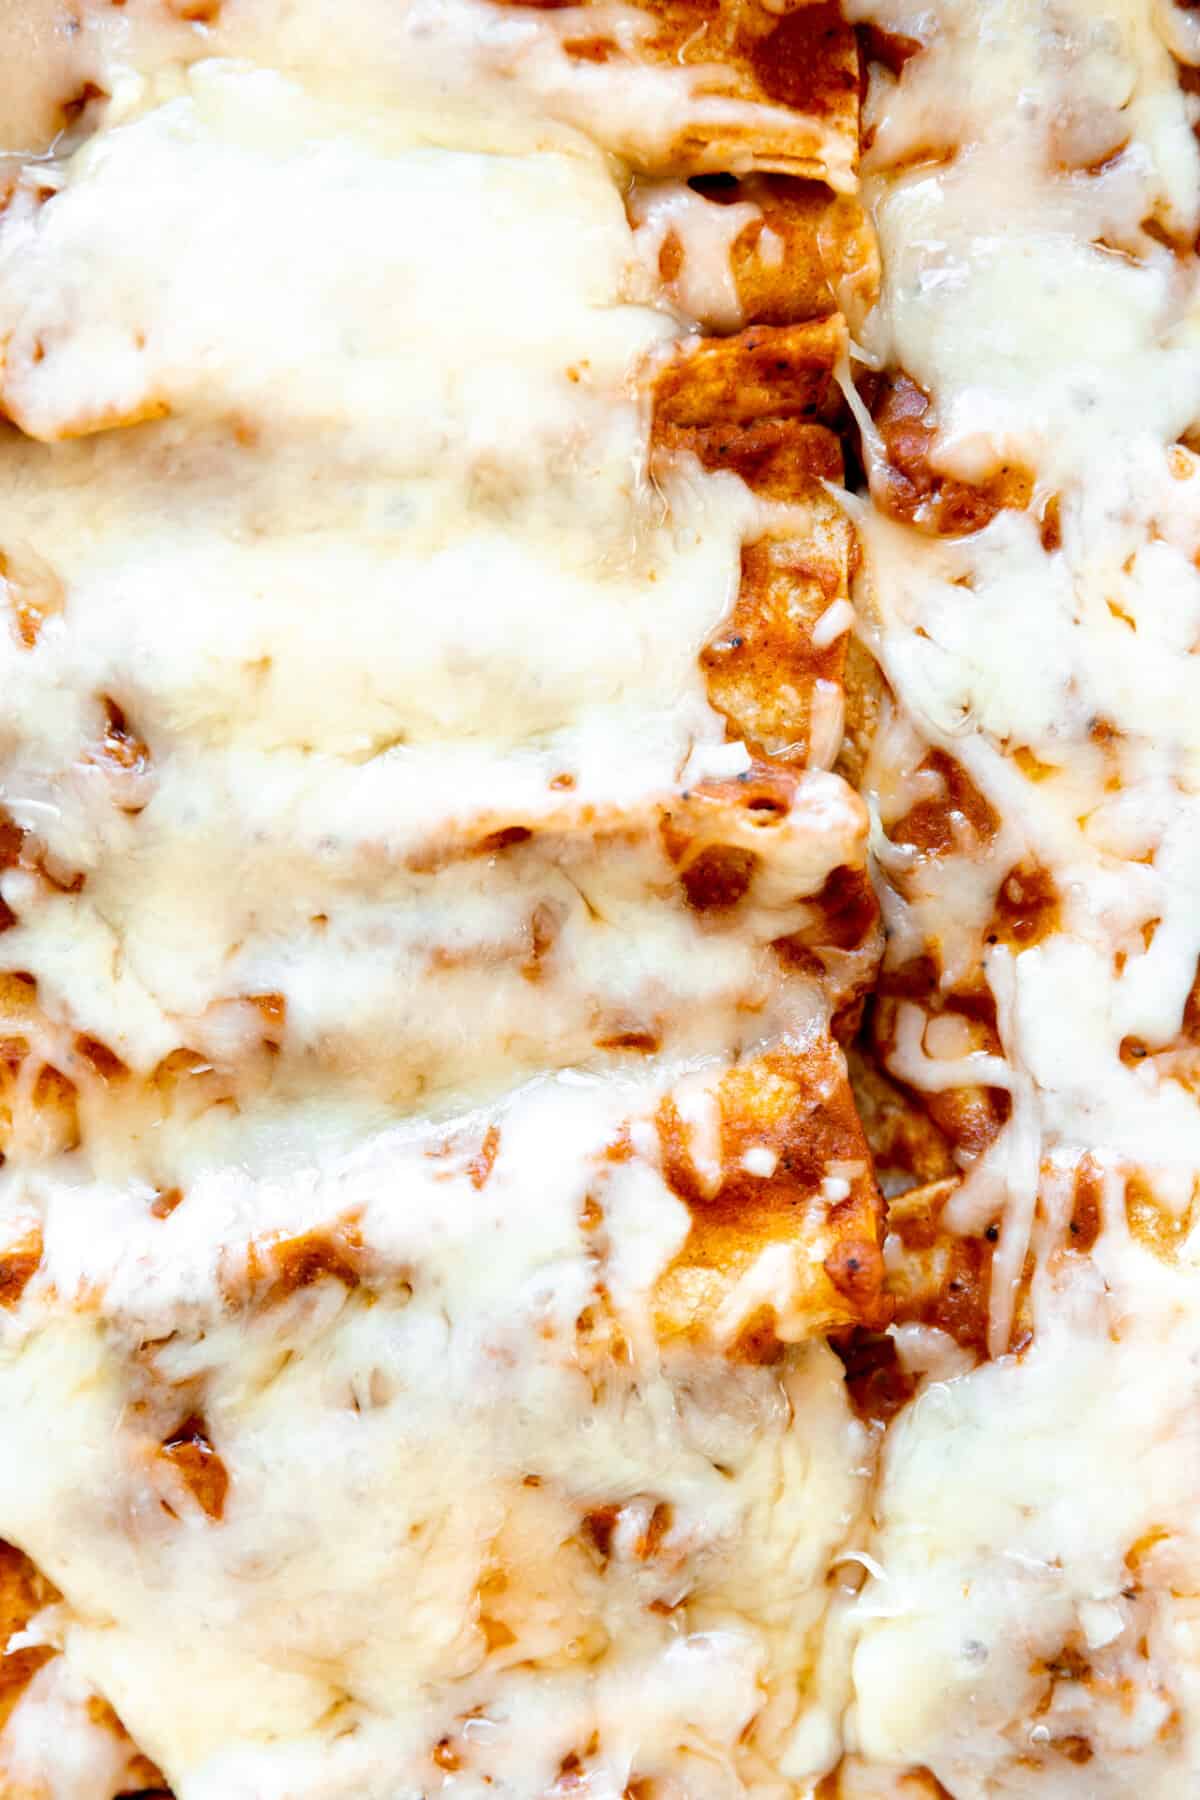 Tex Mex cheese enchiladas topped with extra melty cheese after baking.